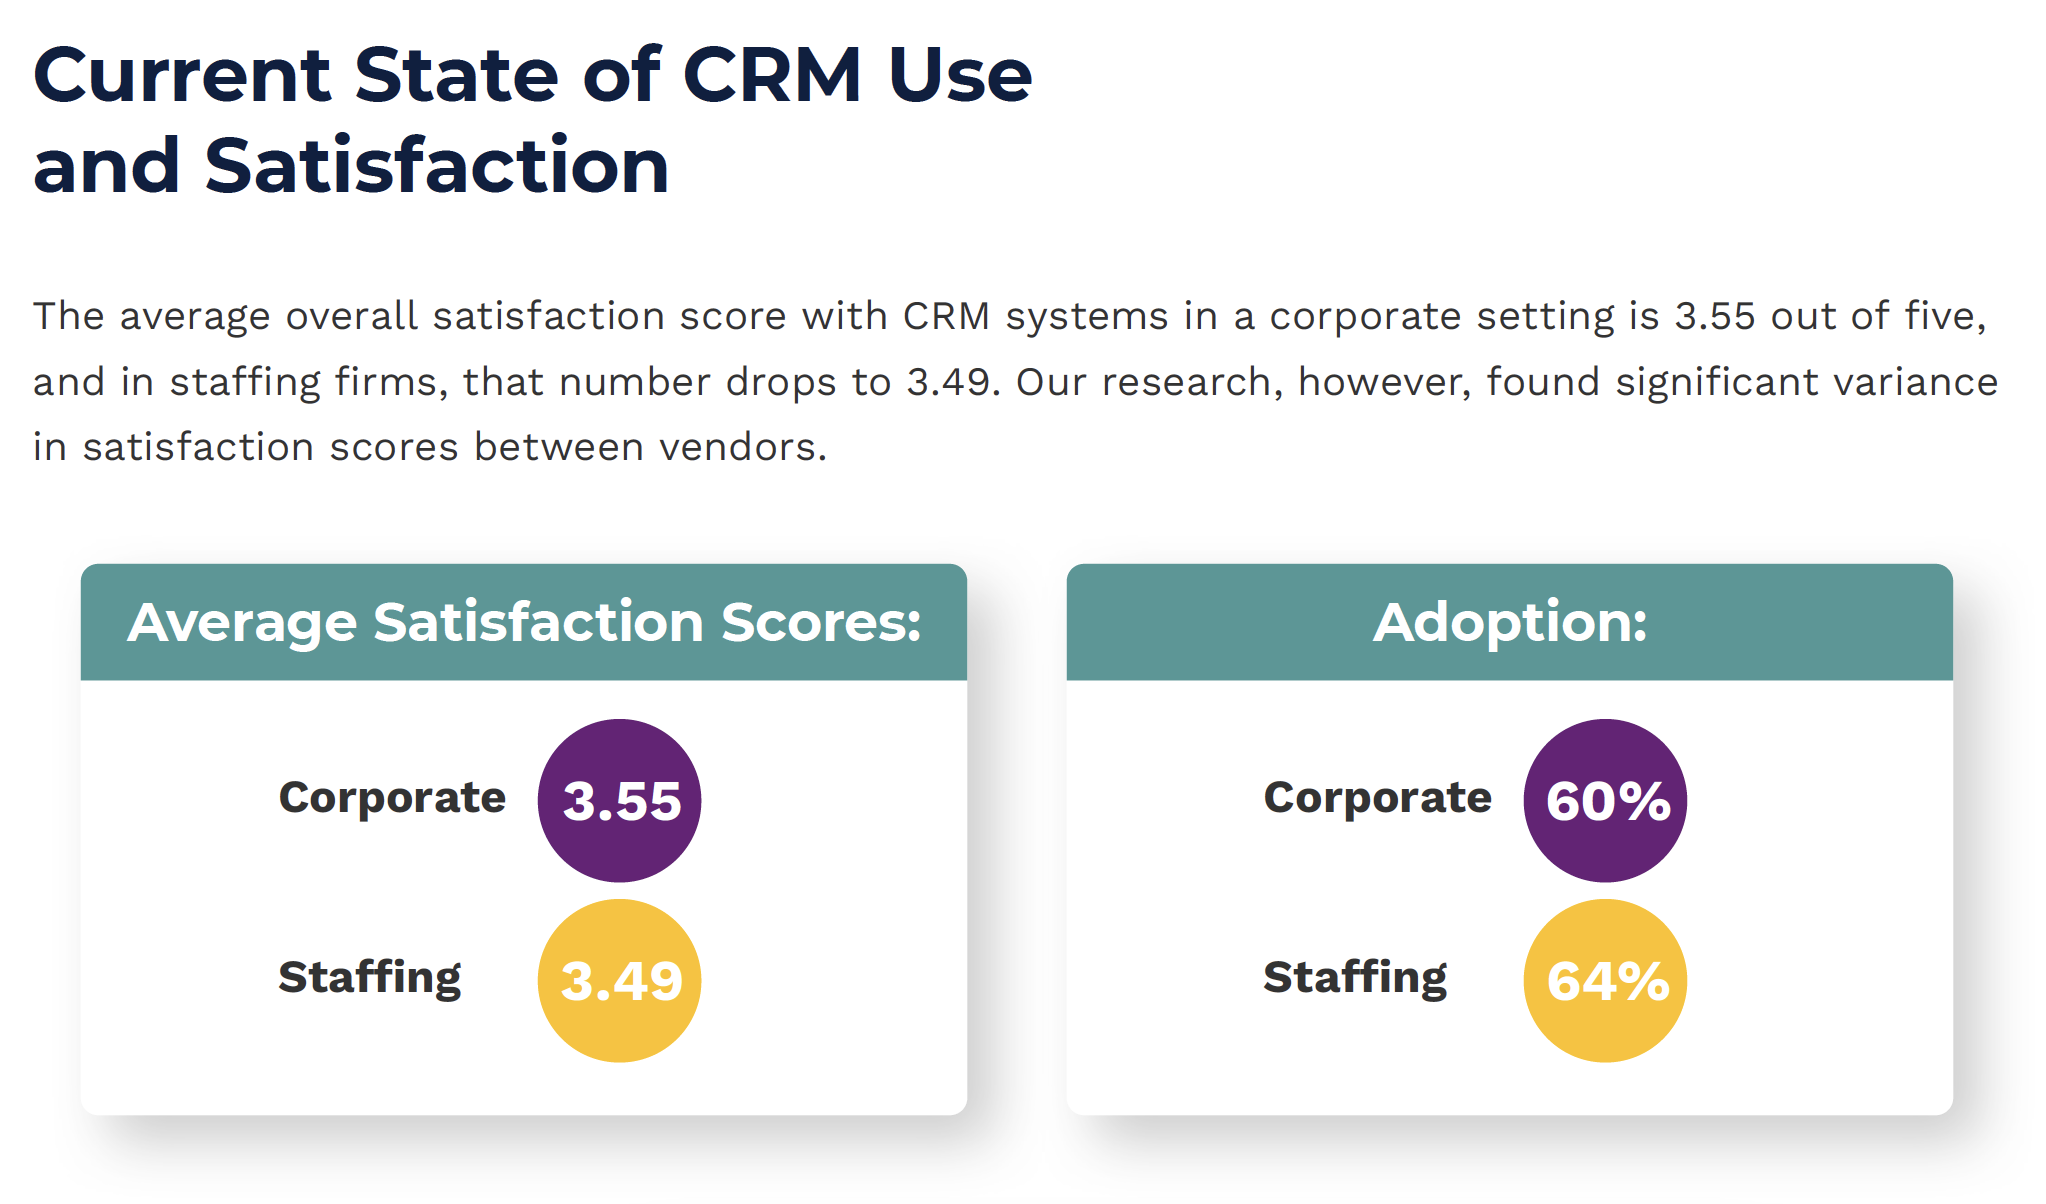 CRM use and satisfaction